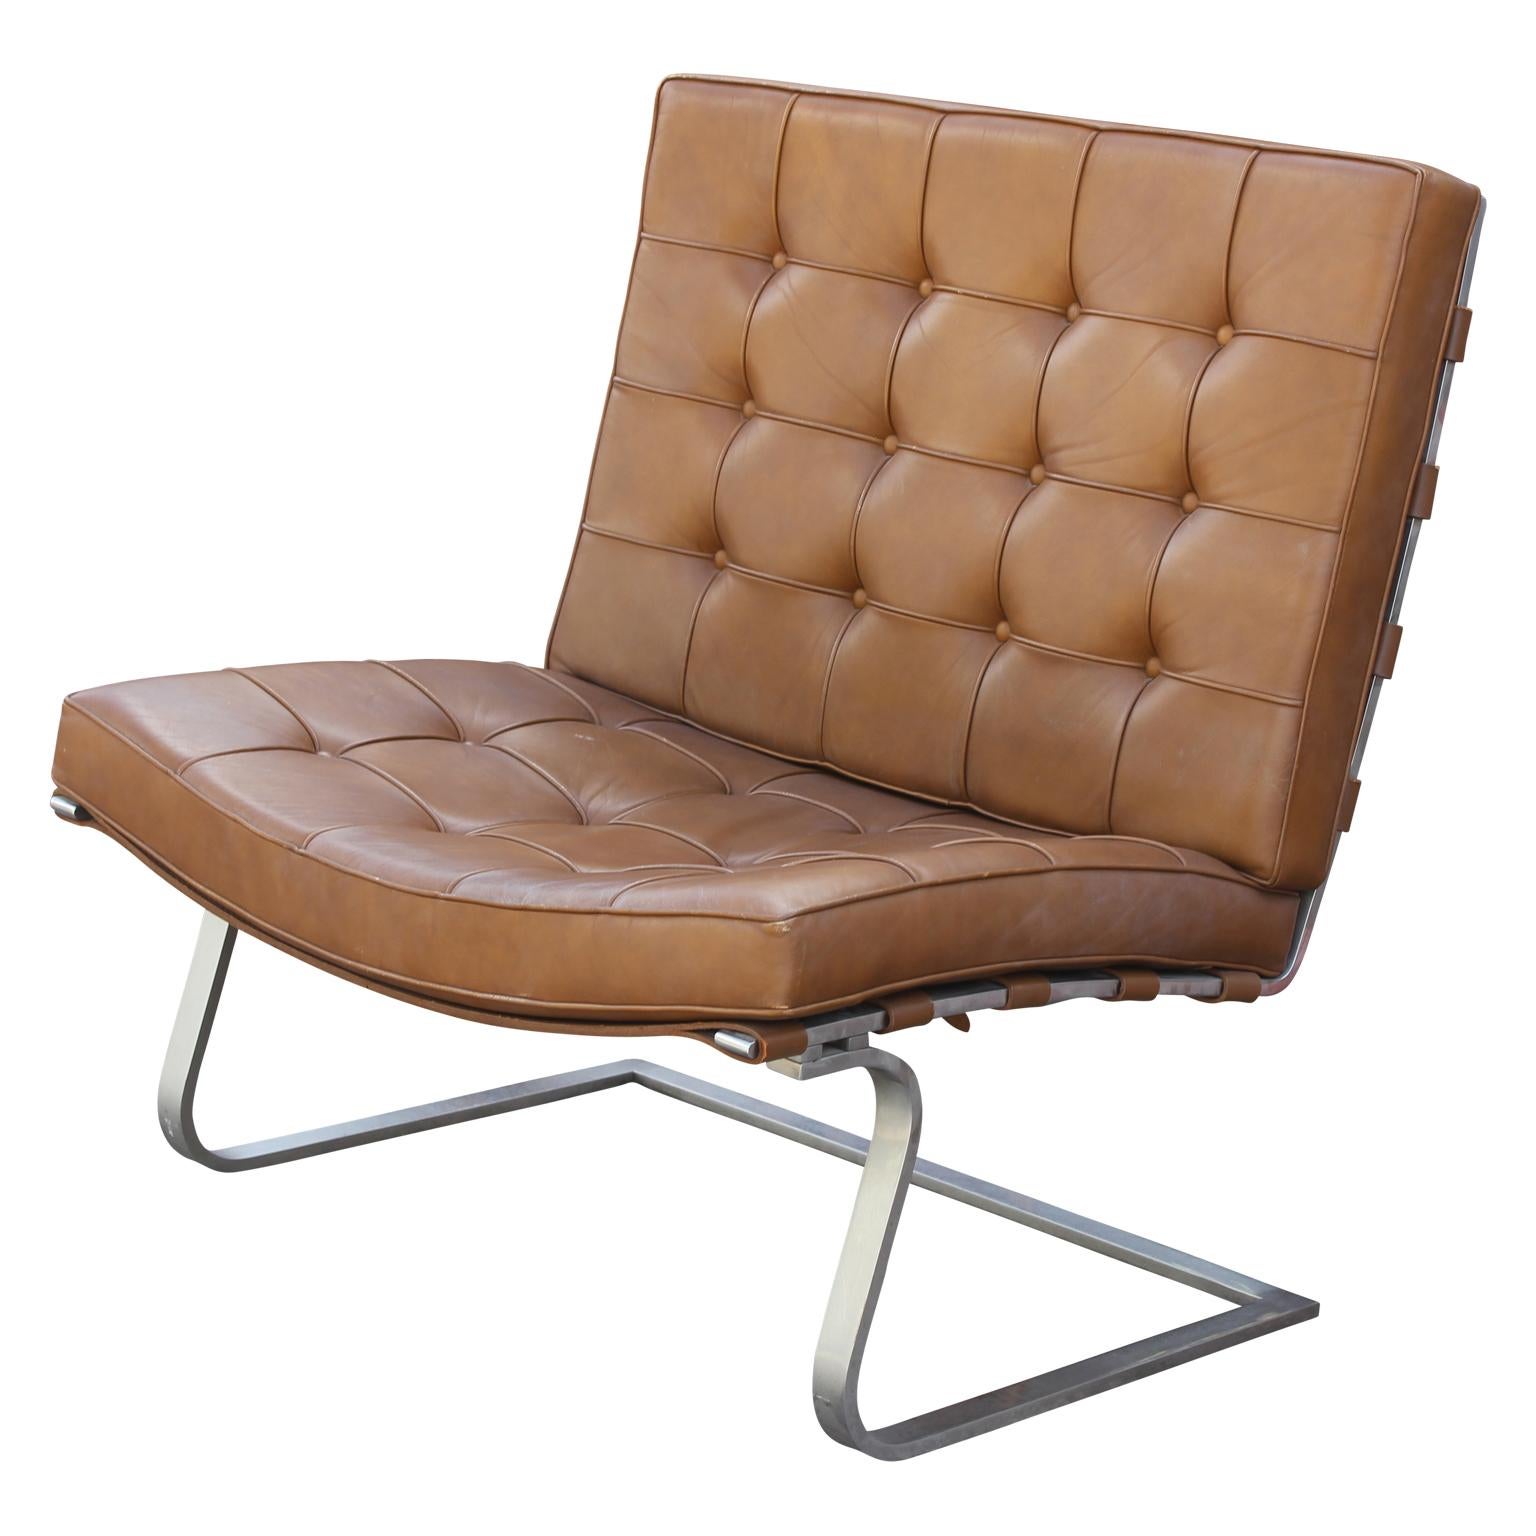 American Set of Four Tufted Brown Leather Mies Van Der Rohe Tugendhat Chairs